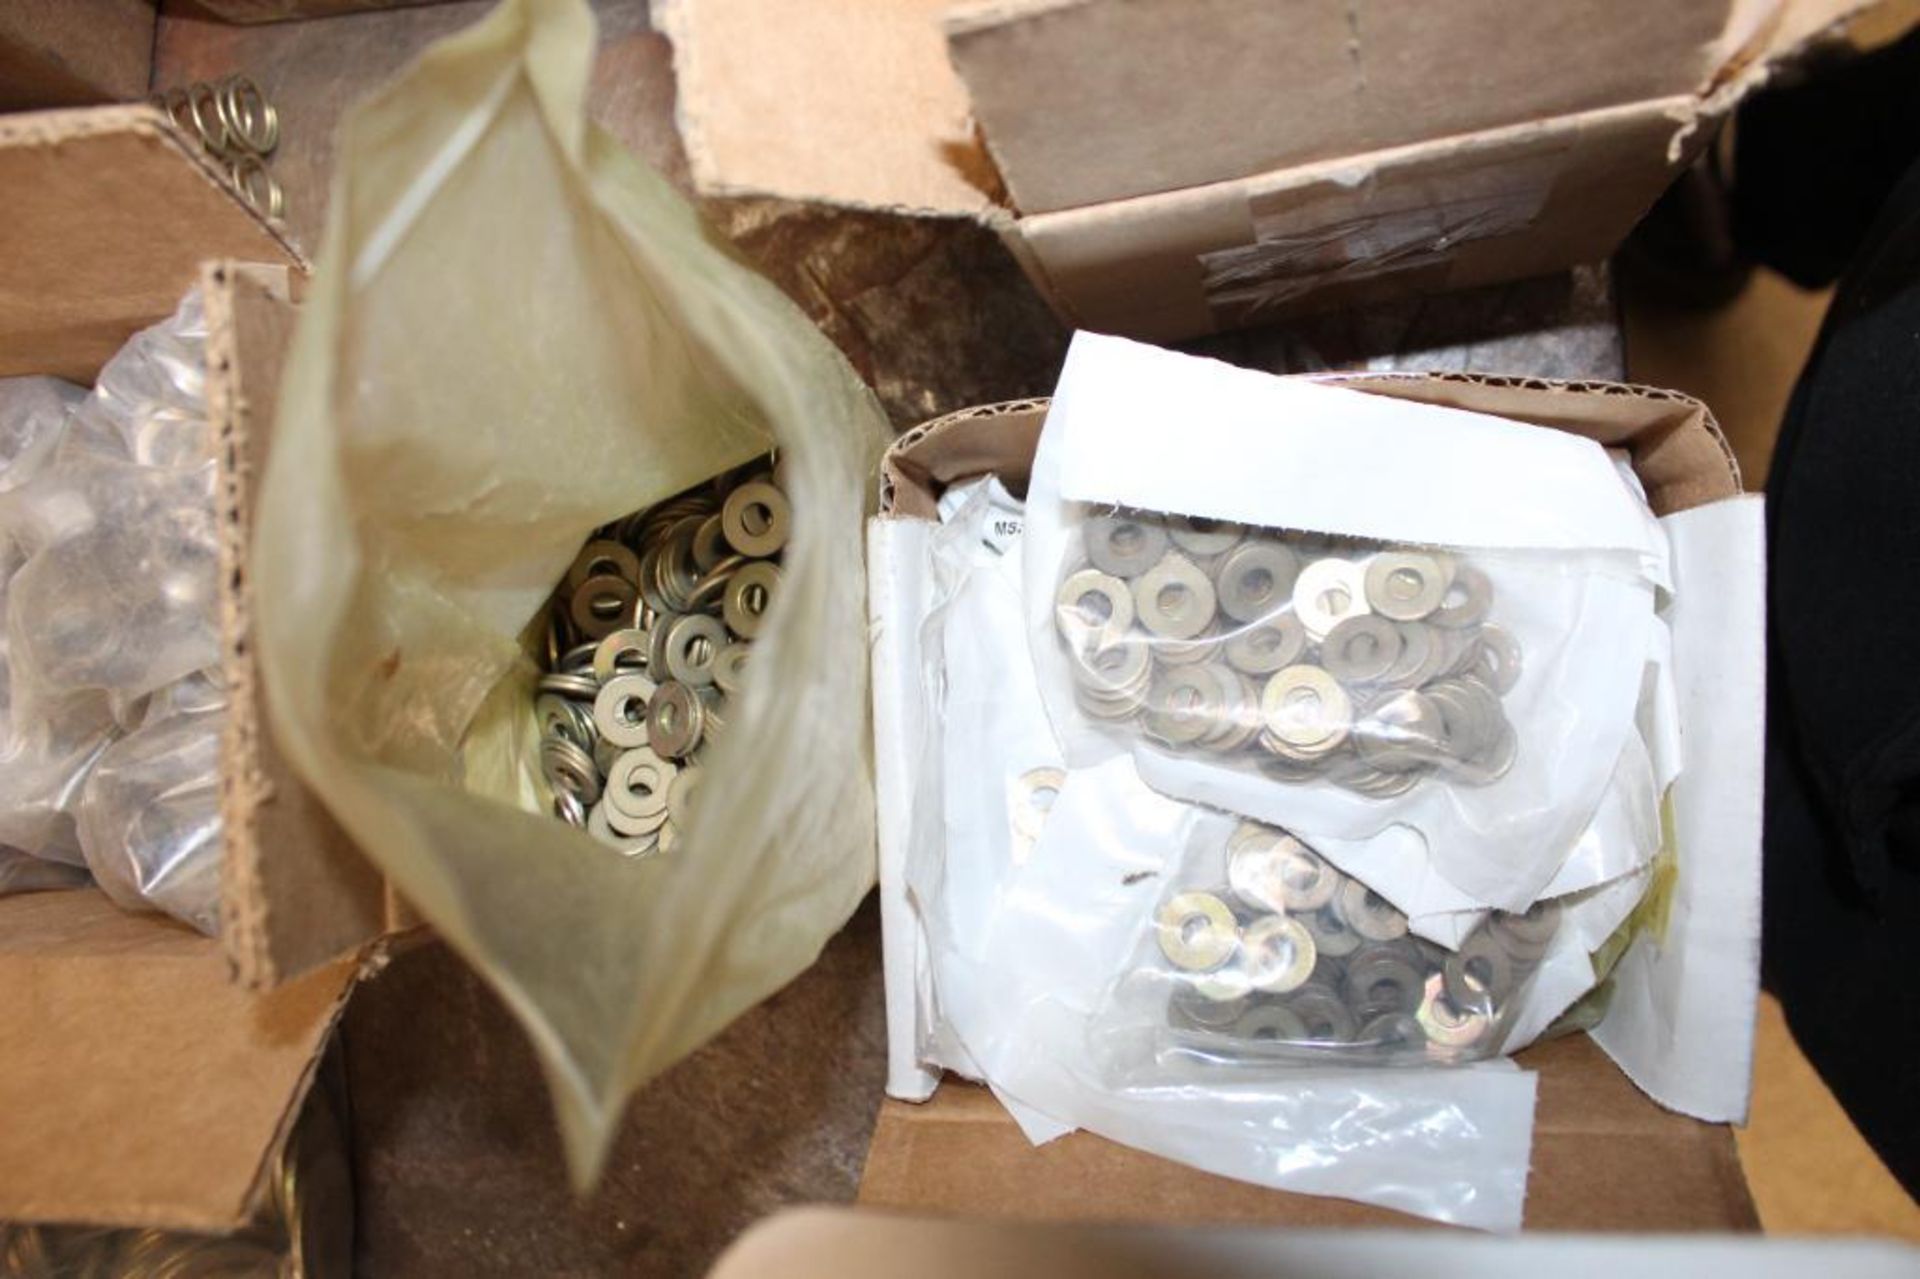 Lot of Assorted Pins, Nuts, Washers, Bolts, and S Hooks - Image 4 of 9